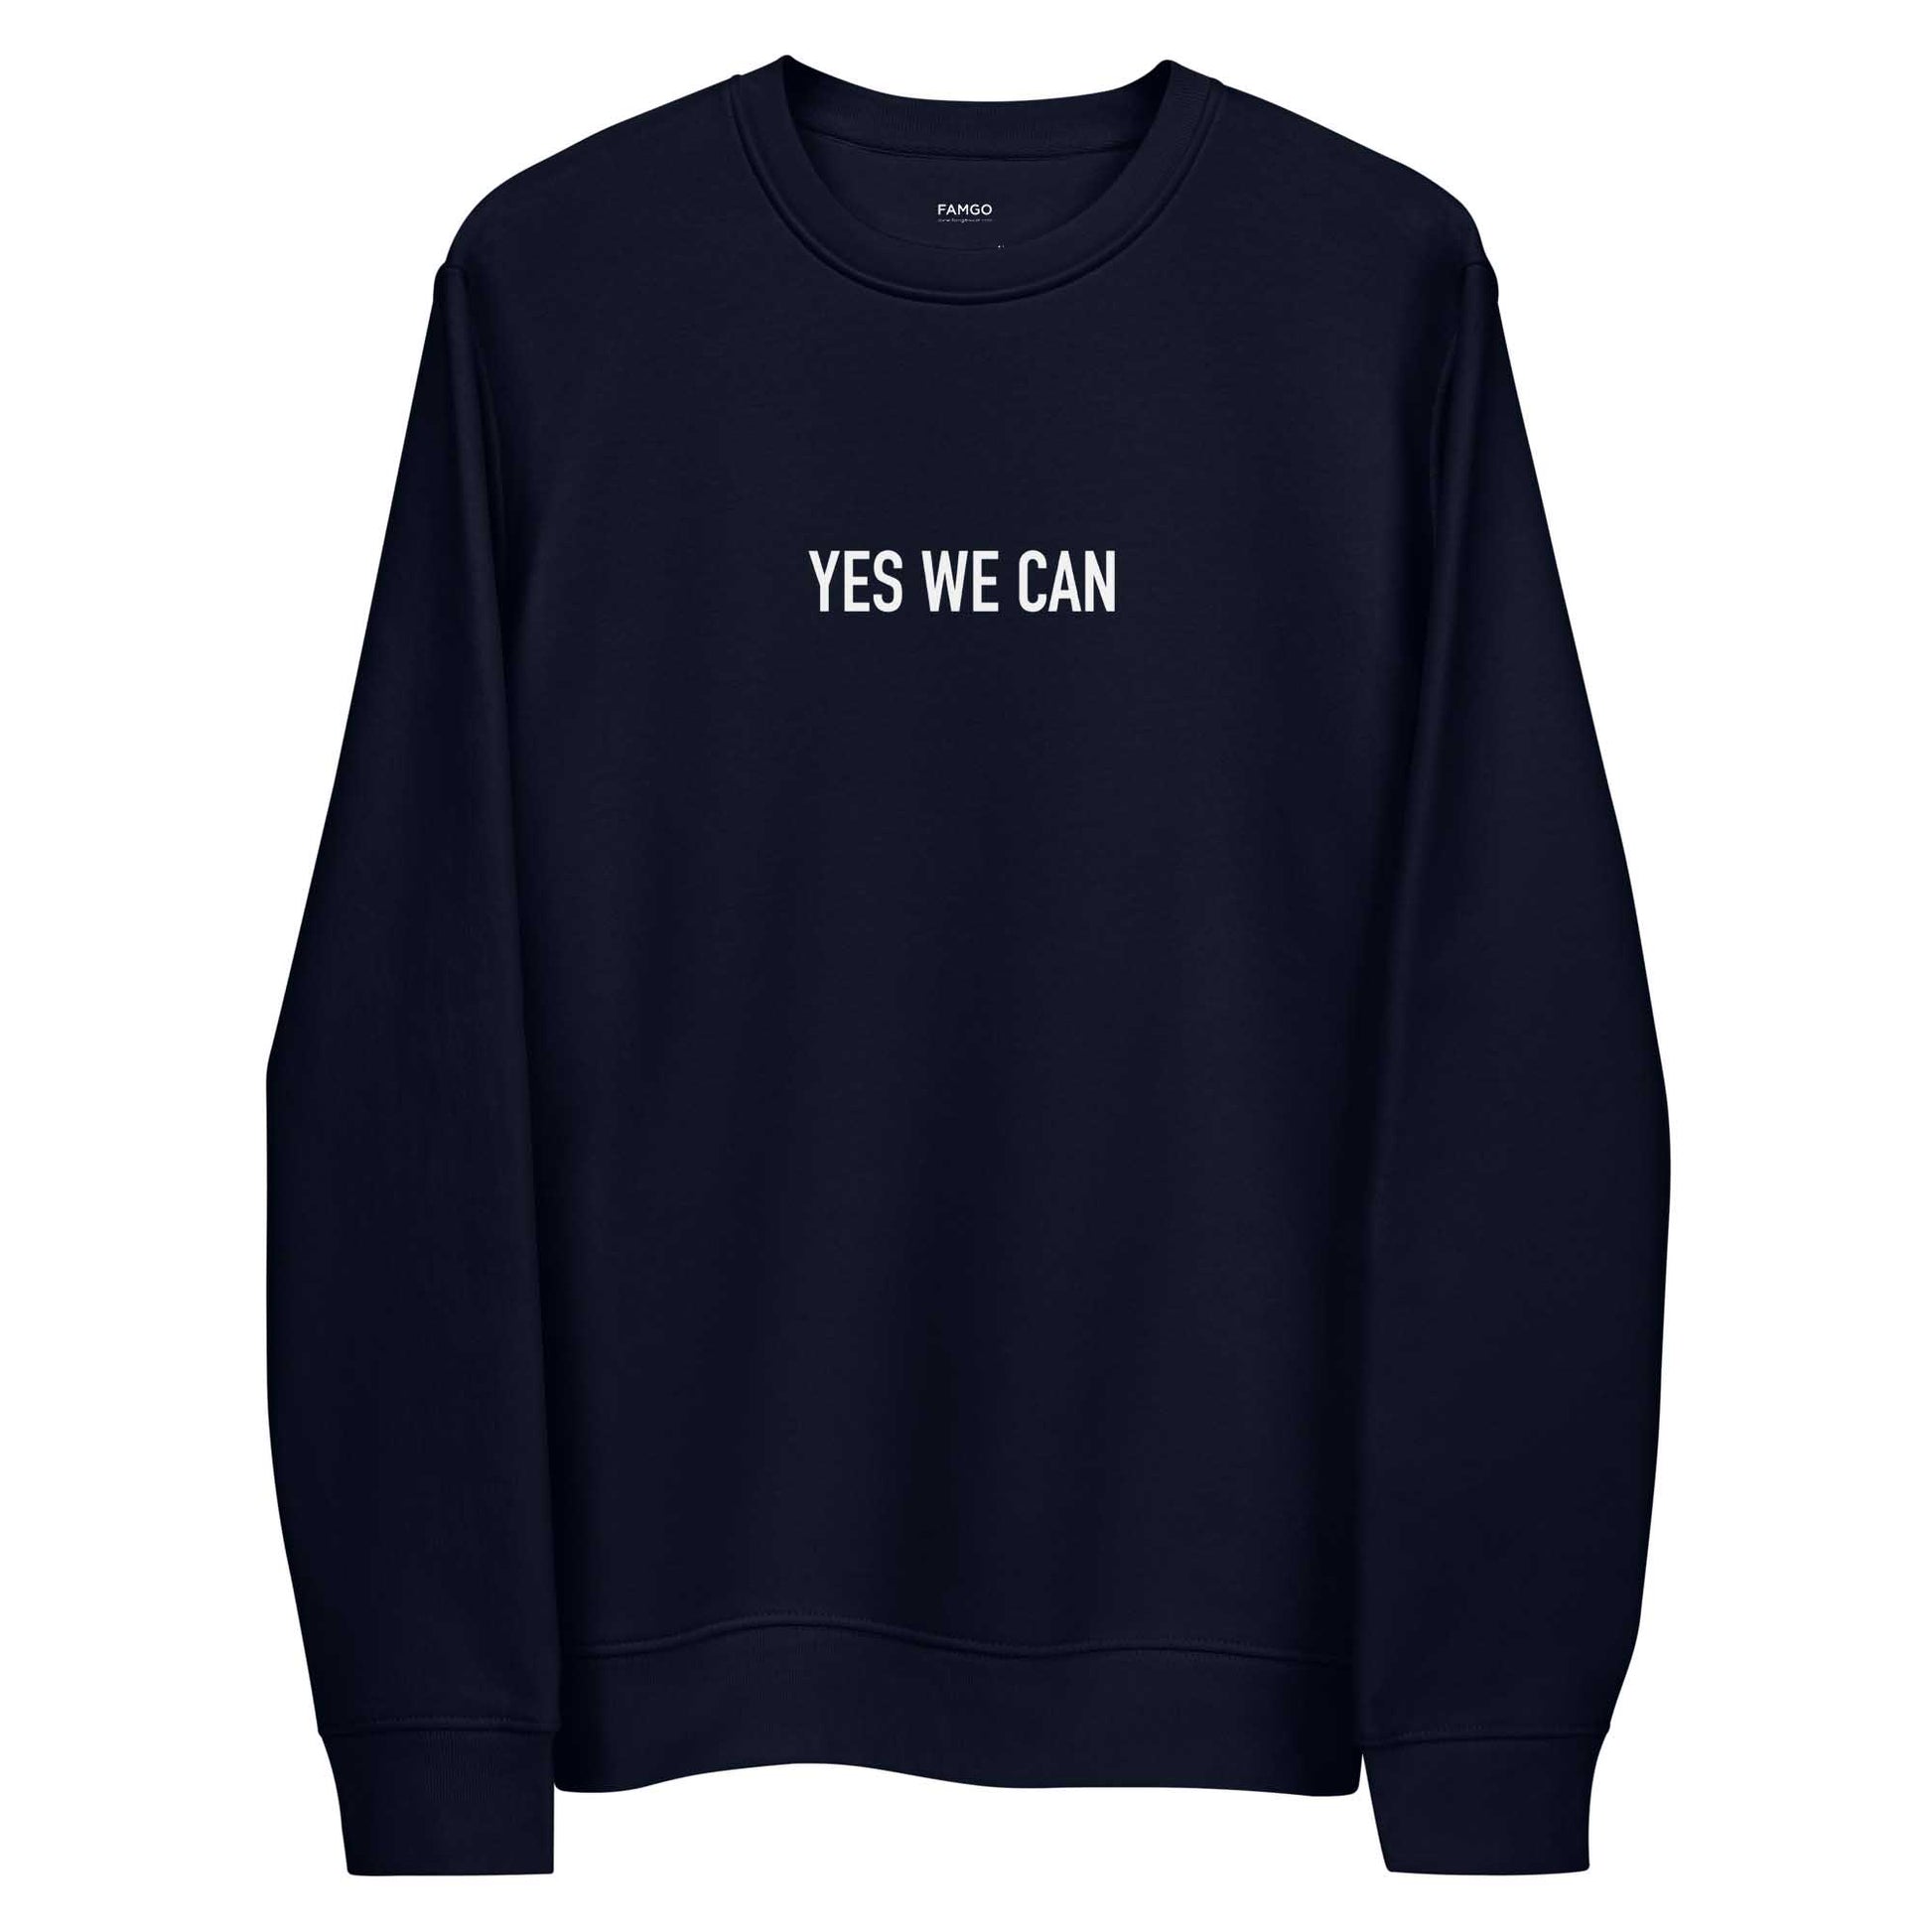 Women navy positive sweatshirt with Barack Obama's inspirational quote, "Yes We Can." 